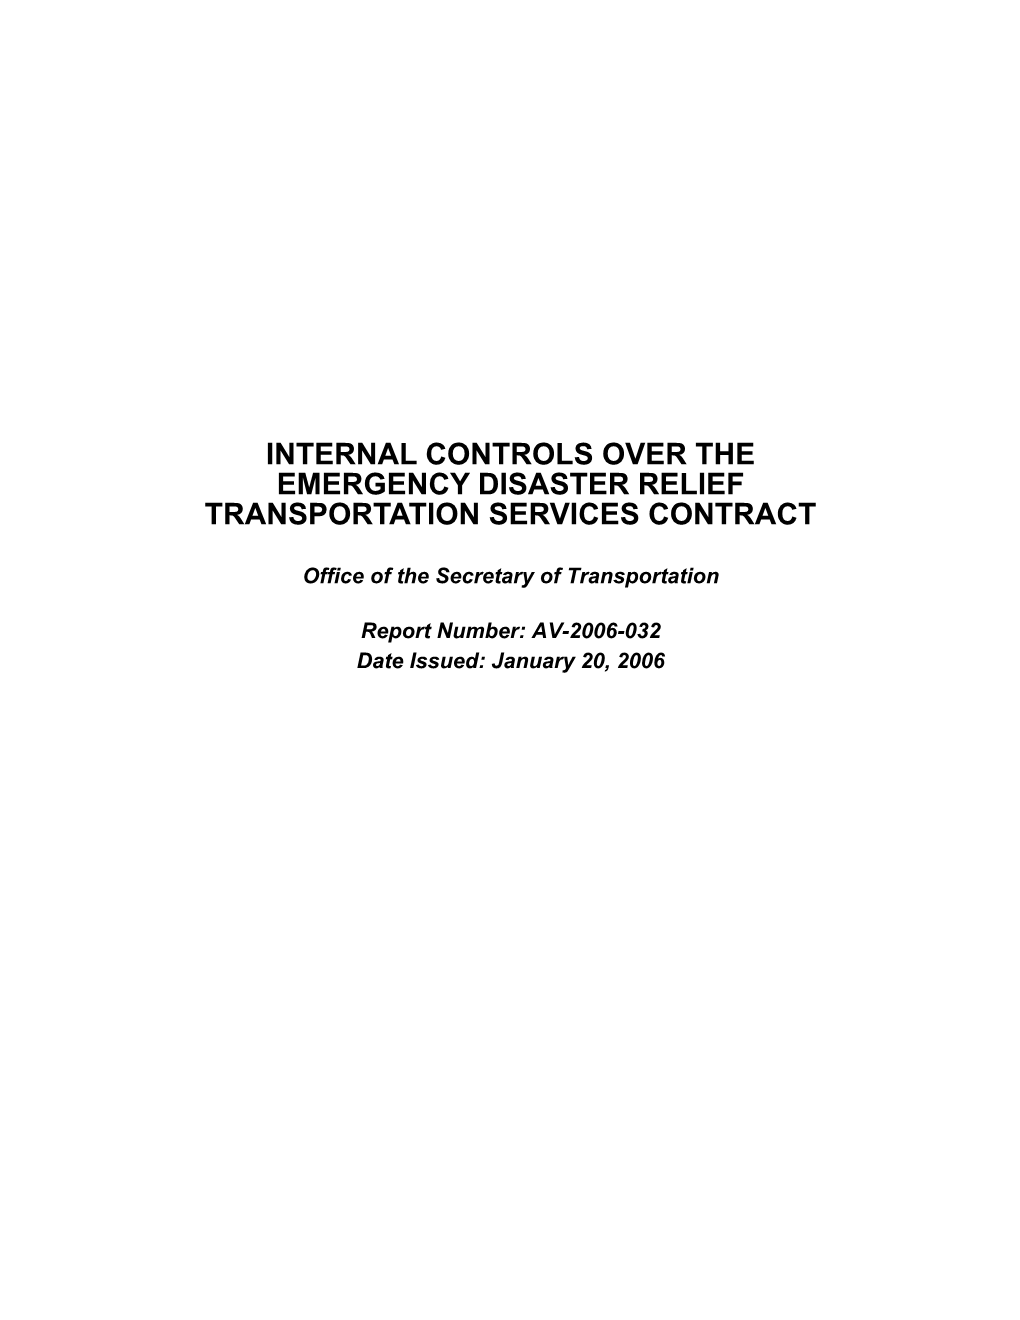 Internal Controls Over the Emergency Disaster Relief Transportation Services Contract